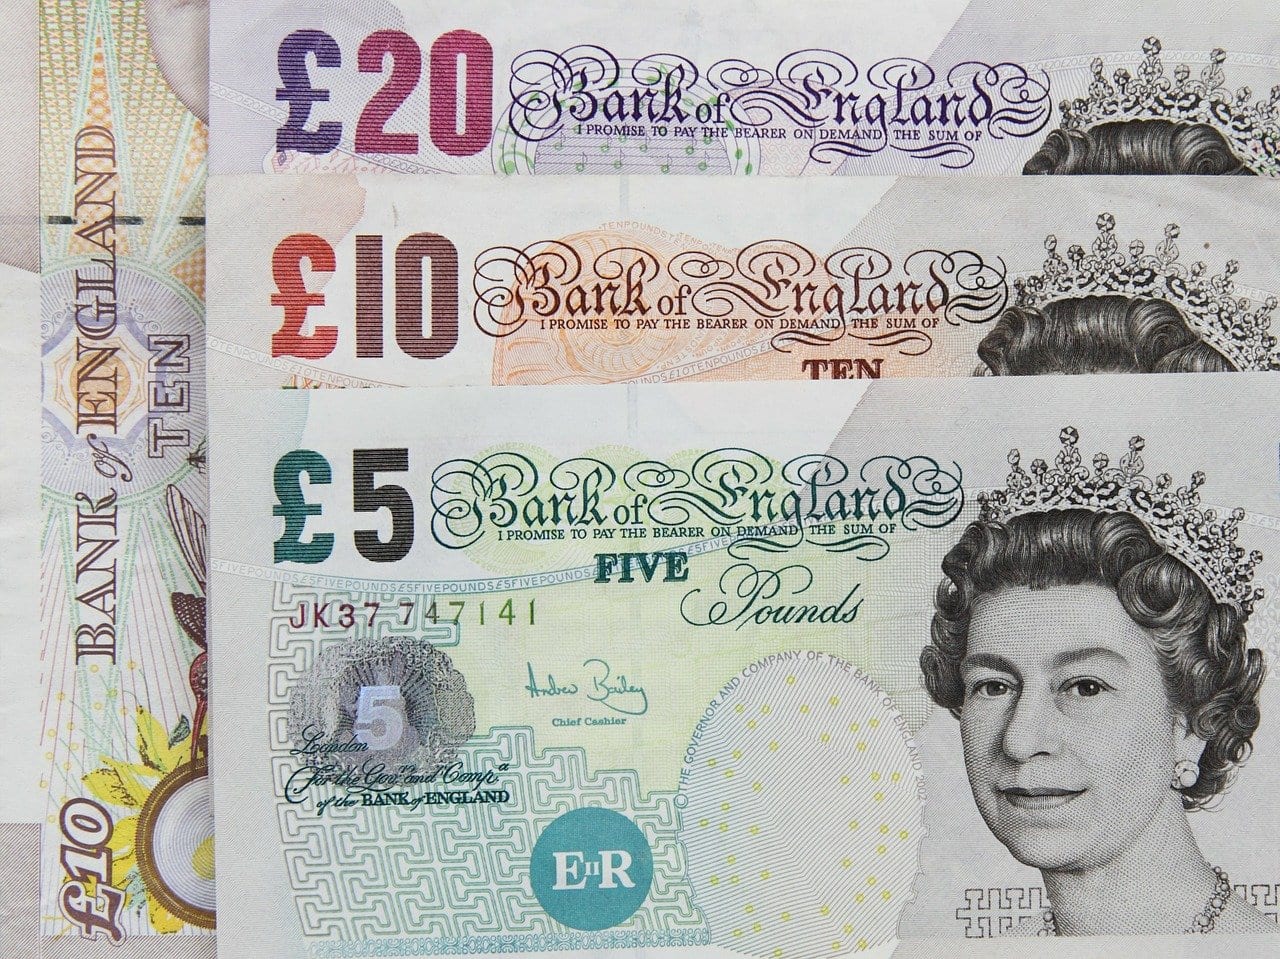 The Queen of England on bank notes